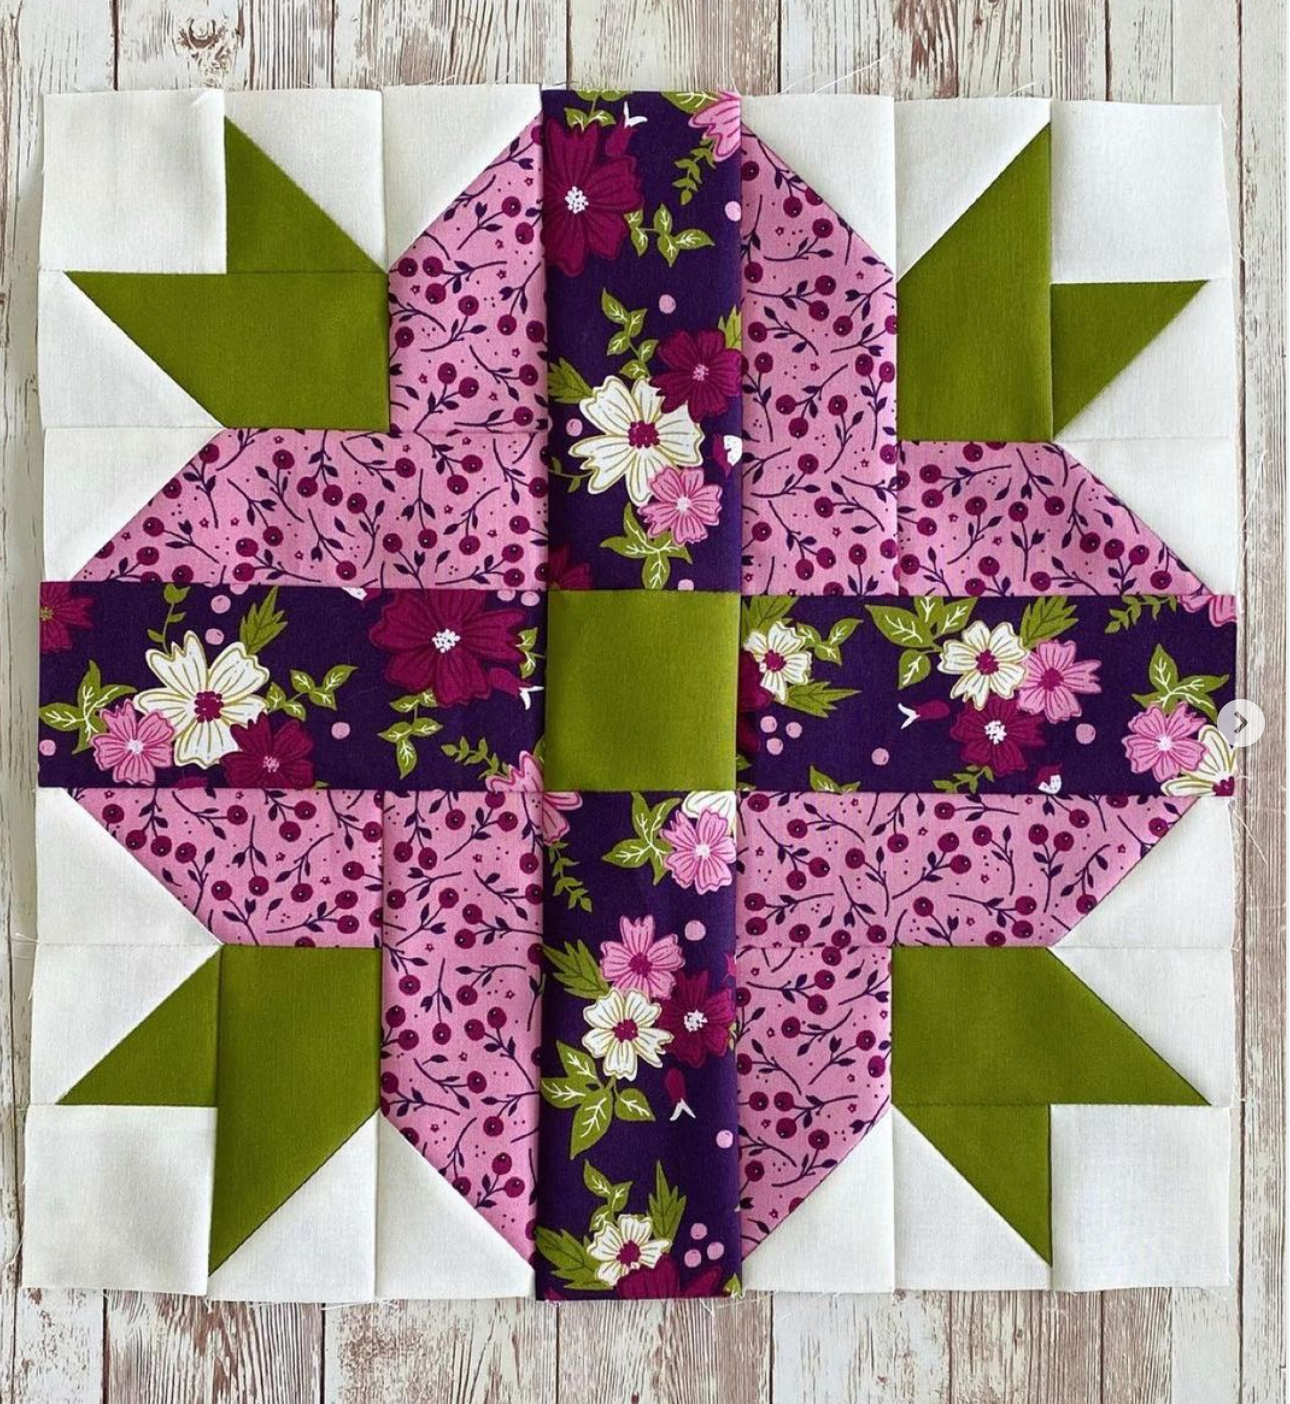 Wild Meadow "Meadow Blossoms" Quilt Pattern (Downloadable PDF)